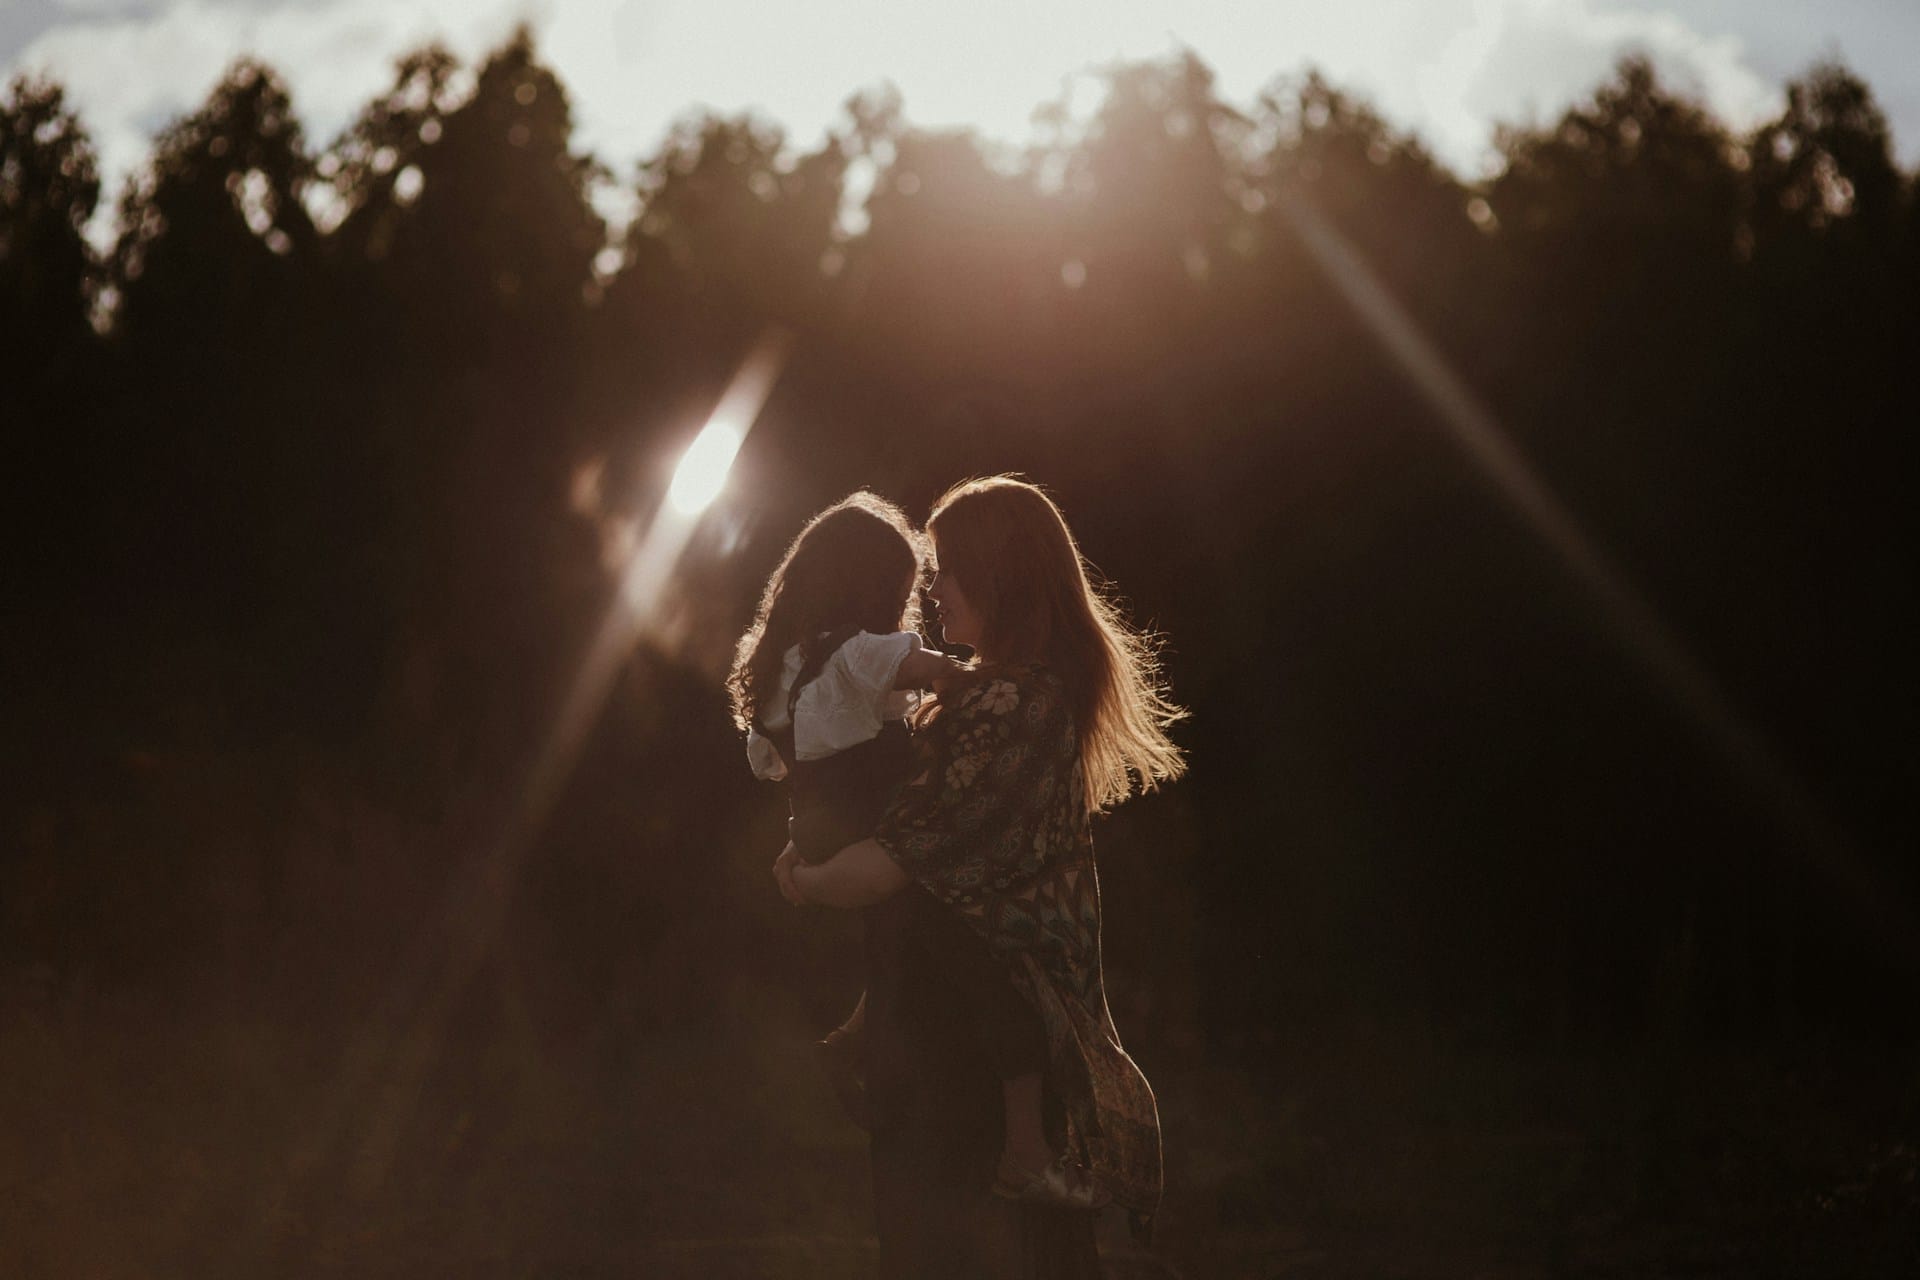 A woman holds up her small child as the sun goes down behind some trees, gently lighting the figures in a soft silhouette.